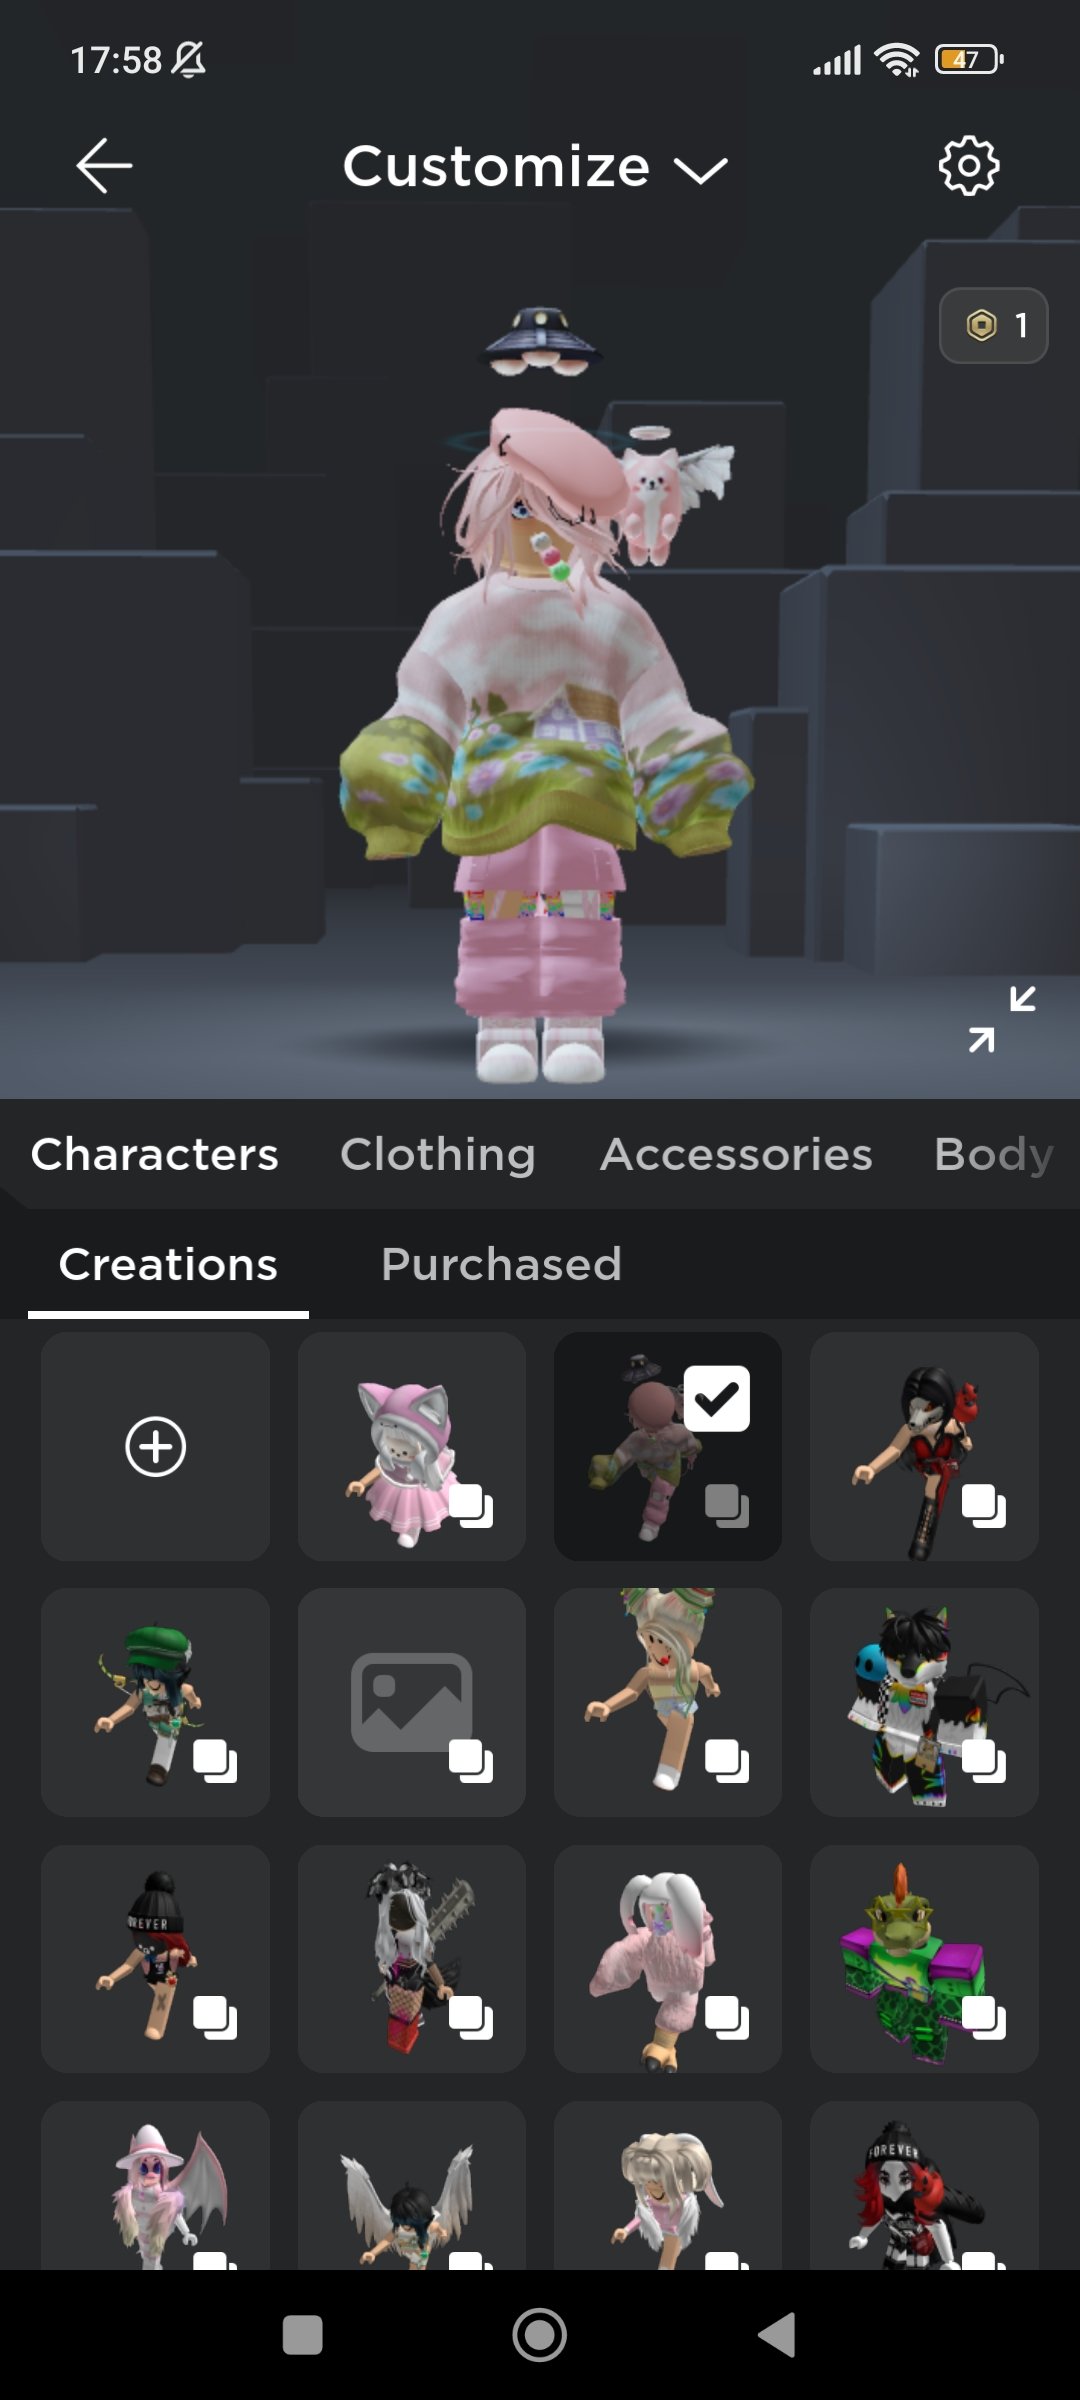 Selling - Selling Royale high items - EpicNPC